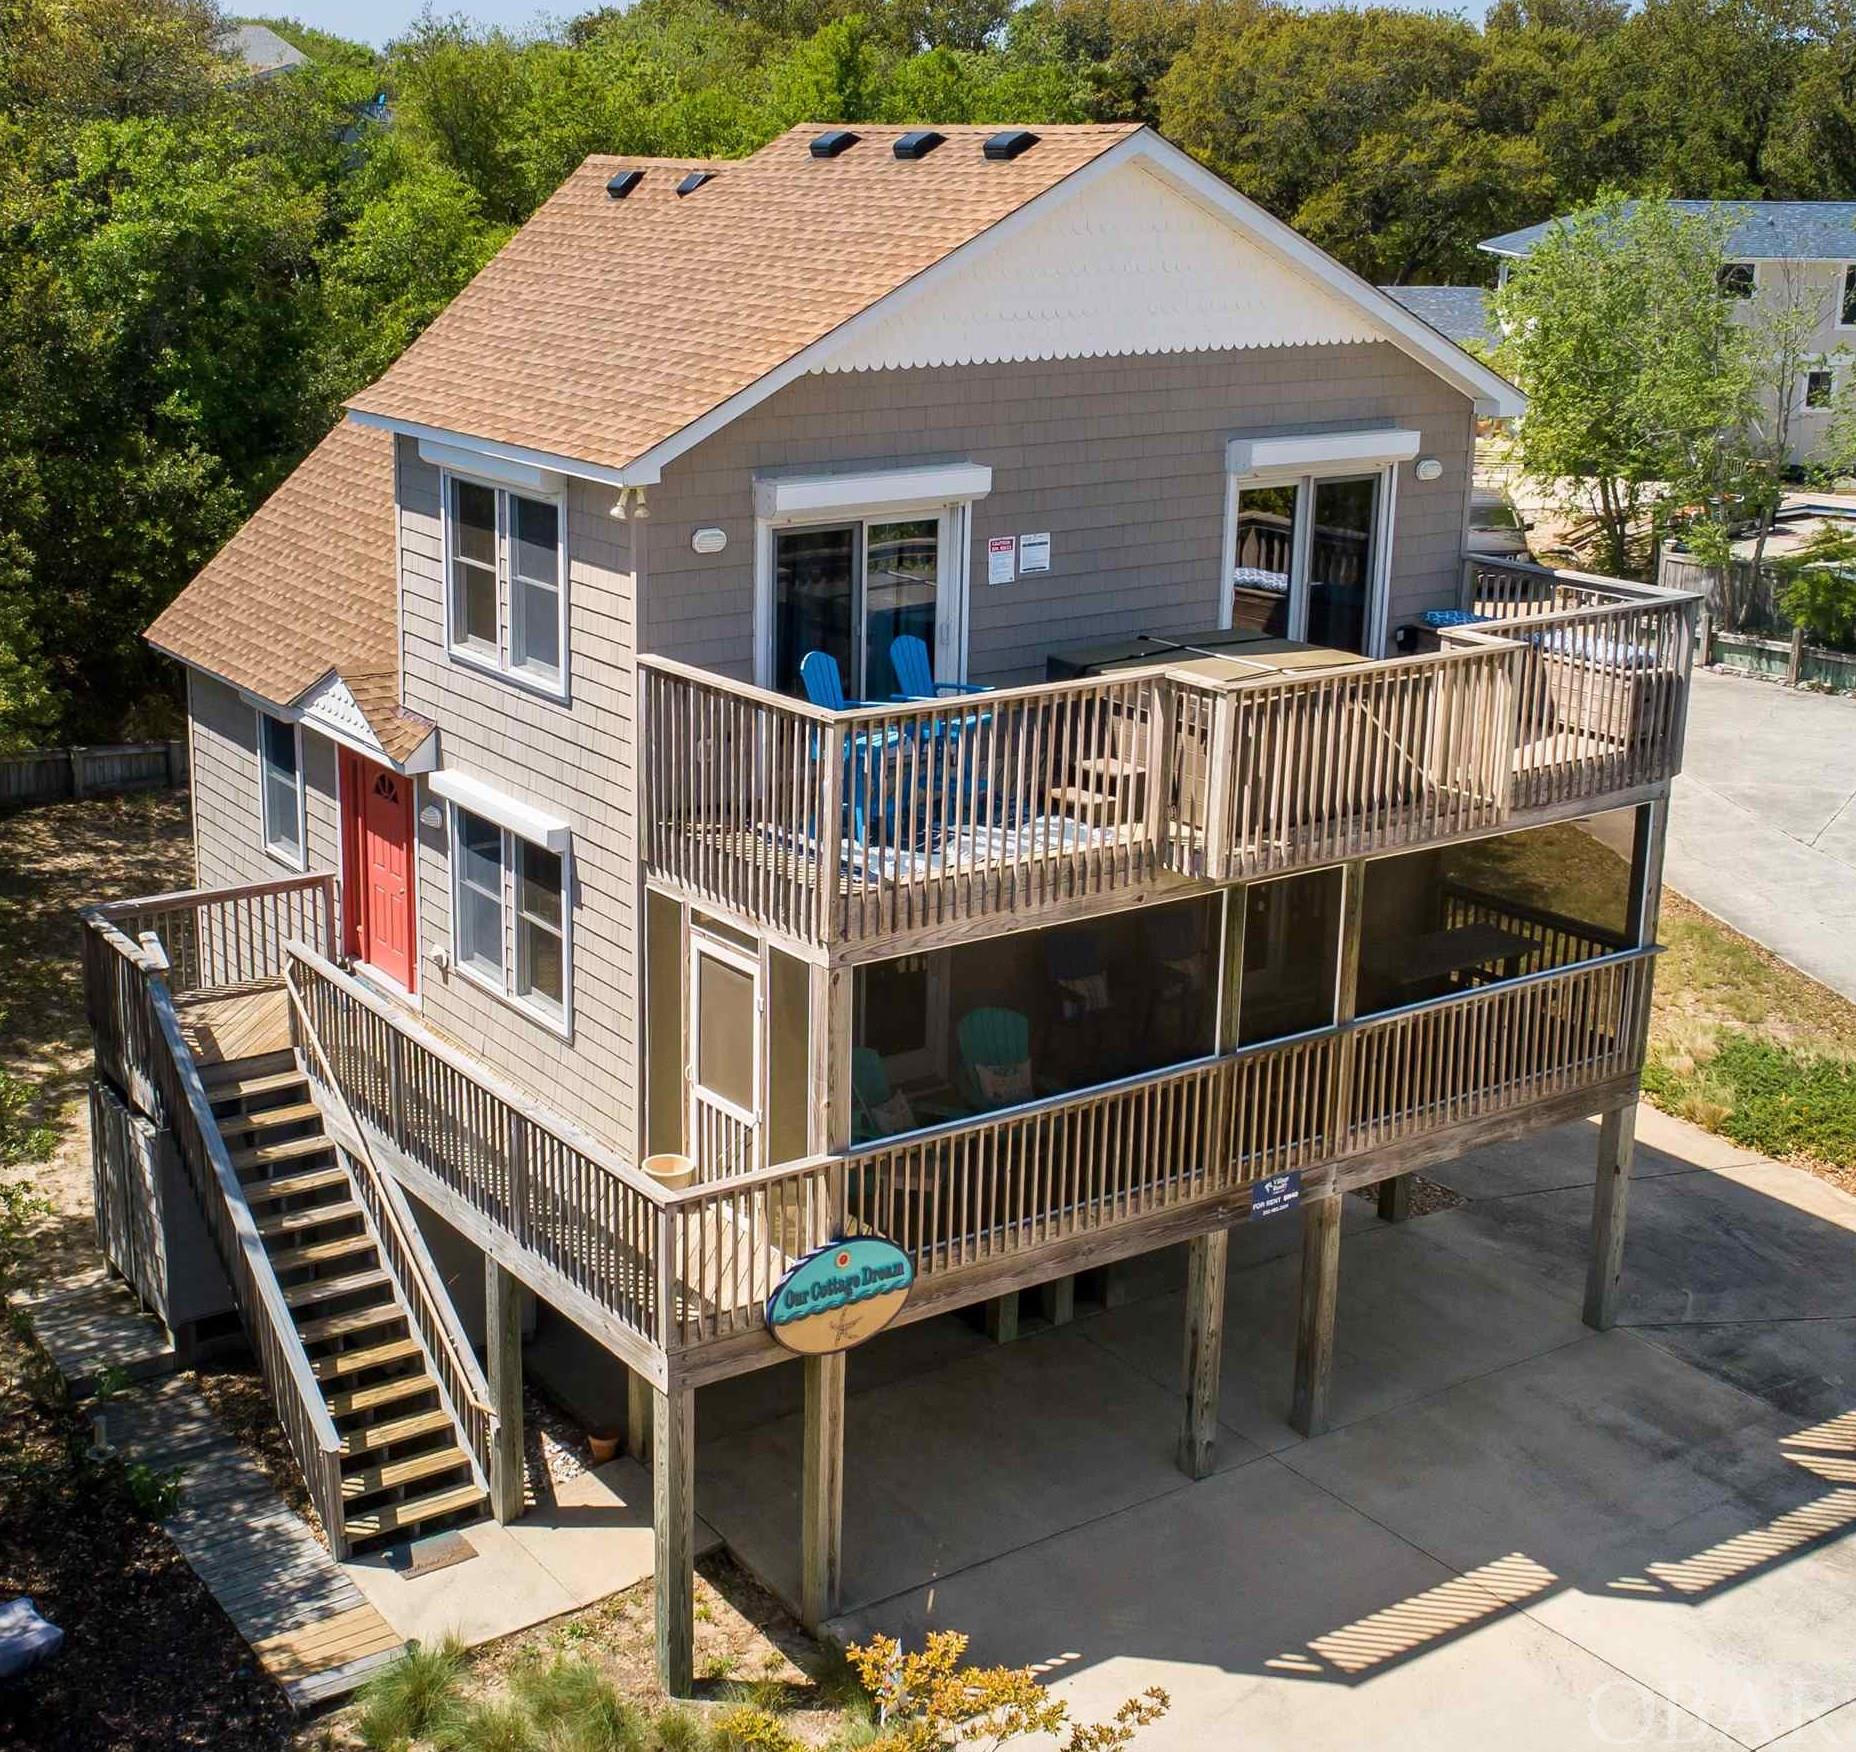 Wanting to live in Southern Shores... this is your lucky day. Just move in! This traditional Saltbox on pilings is less than 1/2 mile to the beach access. This comfortable and meticulously maintained home is nestled in center of private cul-de-sac that backs up to the sound, right next to the SSCA private relaxing path that ends at the sound. Civic Assoc. is voluntary but for under $100 a year, you get all the perks of beach life. 3 large comfortable bedrooms plus multi use loft and 2 full bathrooms. Kitchen boasts all new appliances and interior has all been recently painted.  ALL furnishings less owner's personal items and the 5 piece heavy weight vinyl style deck seating. (Double Seat does NOT convey), but owner will leave the new 4 piece set (2 high-top and 2 low wide back Adirondeck style chairs) on deck valued at over $1200. with ACCEPTABLE OFFER by end of April. Sellers are second owners that have personalized this beauty with some true beach accents.  The soft inviting coral and teal color scheme through-out reminds you that you own a home at the beach. You will immediately feel at home comfortably surrounded in that dream beach home, vacation home, 2nd home or absolutely your primary residence! Current owners do rent this almost 2000 sq.ft cozy cottage during a short 20 week season that does give them a positive cash flow for the summer but they truly enjoy it more when they get to have it all to themselves and family. It is tastefully decorated through out with some real show stoppers including a barn door to a huge laundry room on the ground floor with dry entry to an inviting open foyer downstairs and easy access to levels 1 and 2. Sellers have installed new roof, replaced some lights/fans, some bathroom accessories/fixtures and installed LVP flooring everywhere except kitchen and utility room. Home was custom built by Blue Hoffman in 2002 but honestly would pass as a much newer home due to all the updates and upgrades.Tons and tons of storage including easily accessible hot water heater on ground floor with lots of extra room for holiday or seasonal storage.Plus each bedroom has a nice size closet. Front top level bedroom has sliding glass door to sunbathing deck and hot tub. Owners have thought of everything, including sand buckets, toys, games, corn hole boards, large grill, chairs, umbrella and a complete kitchen giving you all the accoutrements to make dinner your first night here! Weekly rentals for summer must be honored with current management company, but rent proceeds transfer to new owners.  After what's on the books now, feel free to discontinue renting and call it home OR continue to keep renting and hold some summer weeks for yourself. Some more extras include hurricane shutters on main and top levels, property is not in a Flood Zone requiring insurance coverage and owners do not pay flood insurance. Over sized double driveway will accommodate minimum 8 cars! Plenty of room for a pool that will require minimal relocation of some septic lines that owners are being told is easy and can be done while pool goes in! Deck off of main floor is now newly screened in! Don't wait... this is it!